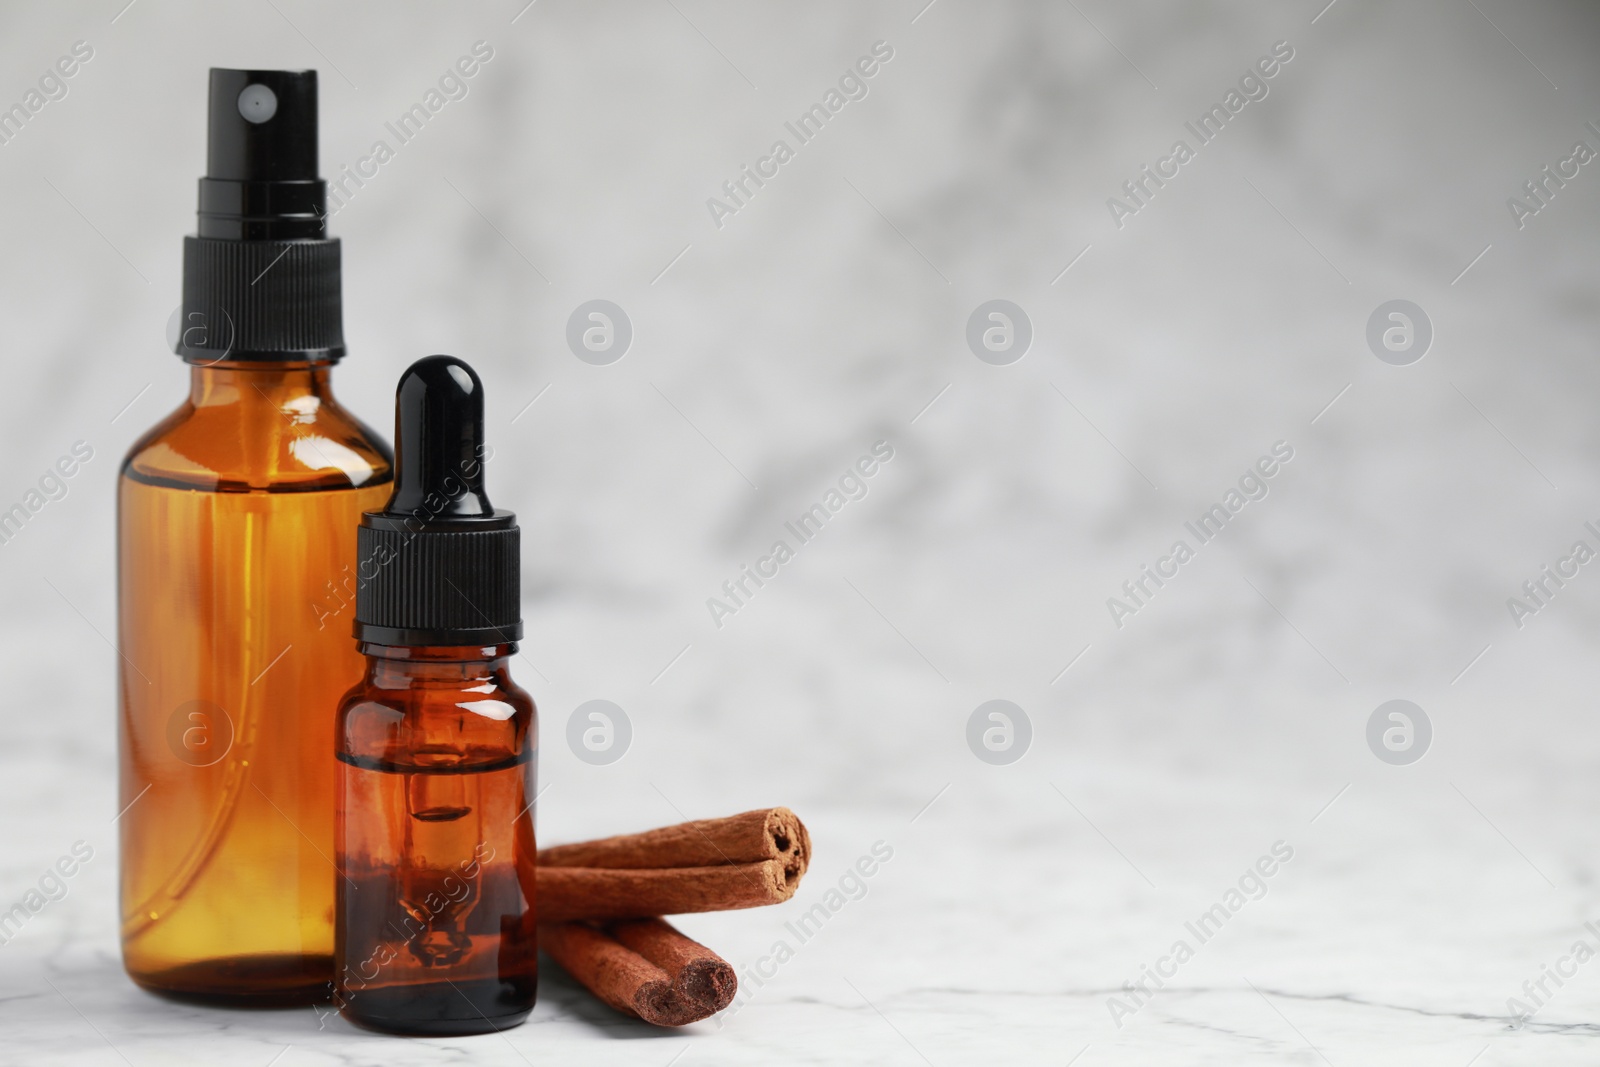 Photo of Bottles of organic cosmetic products and cinnamon sticks on grey marbled background, space for text